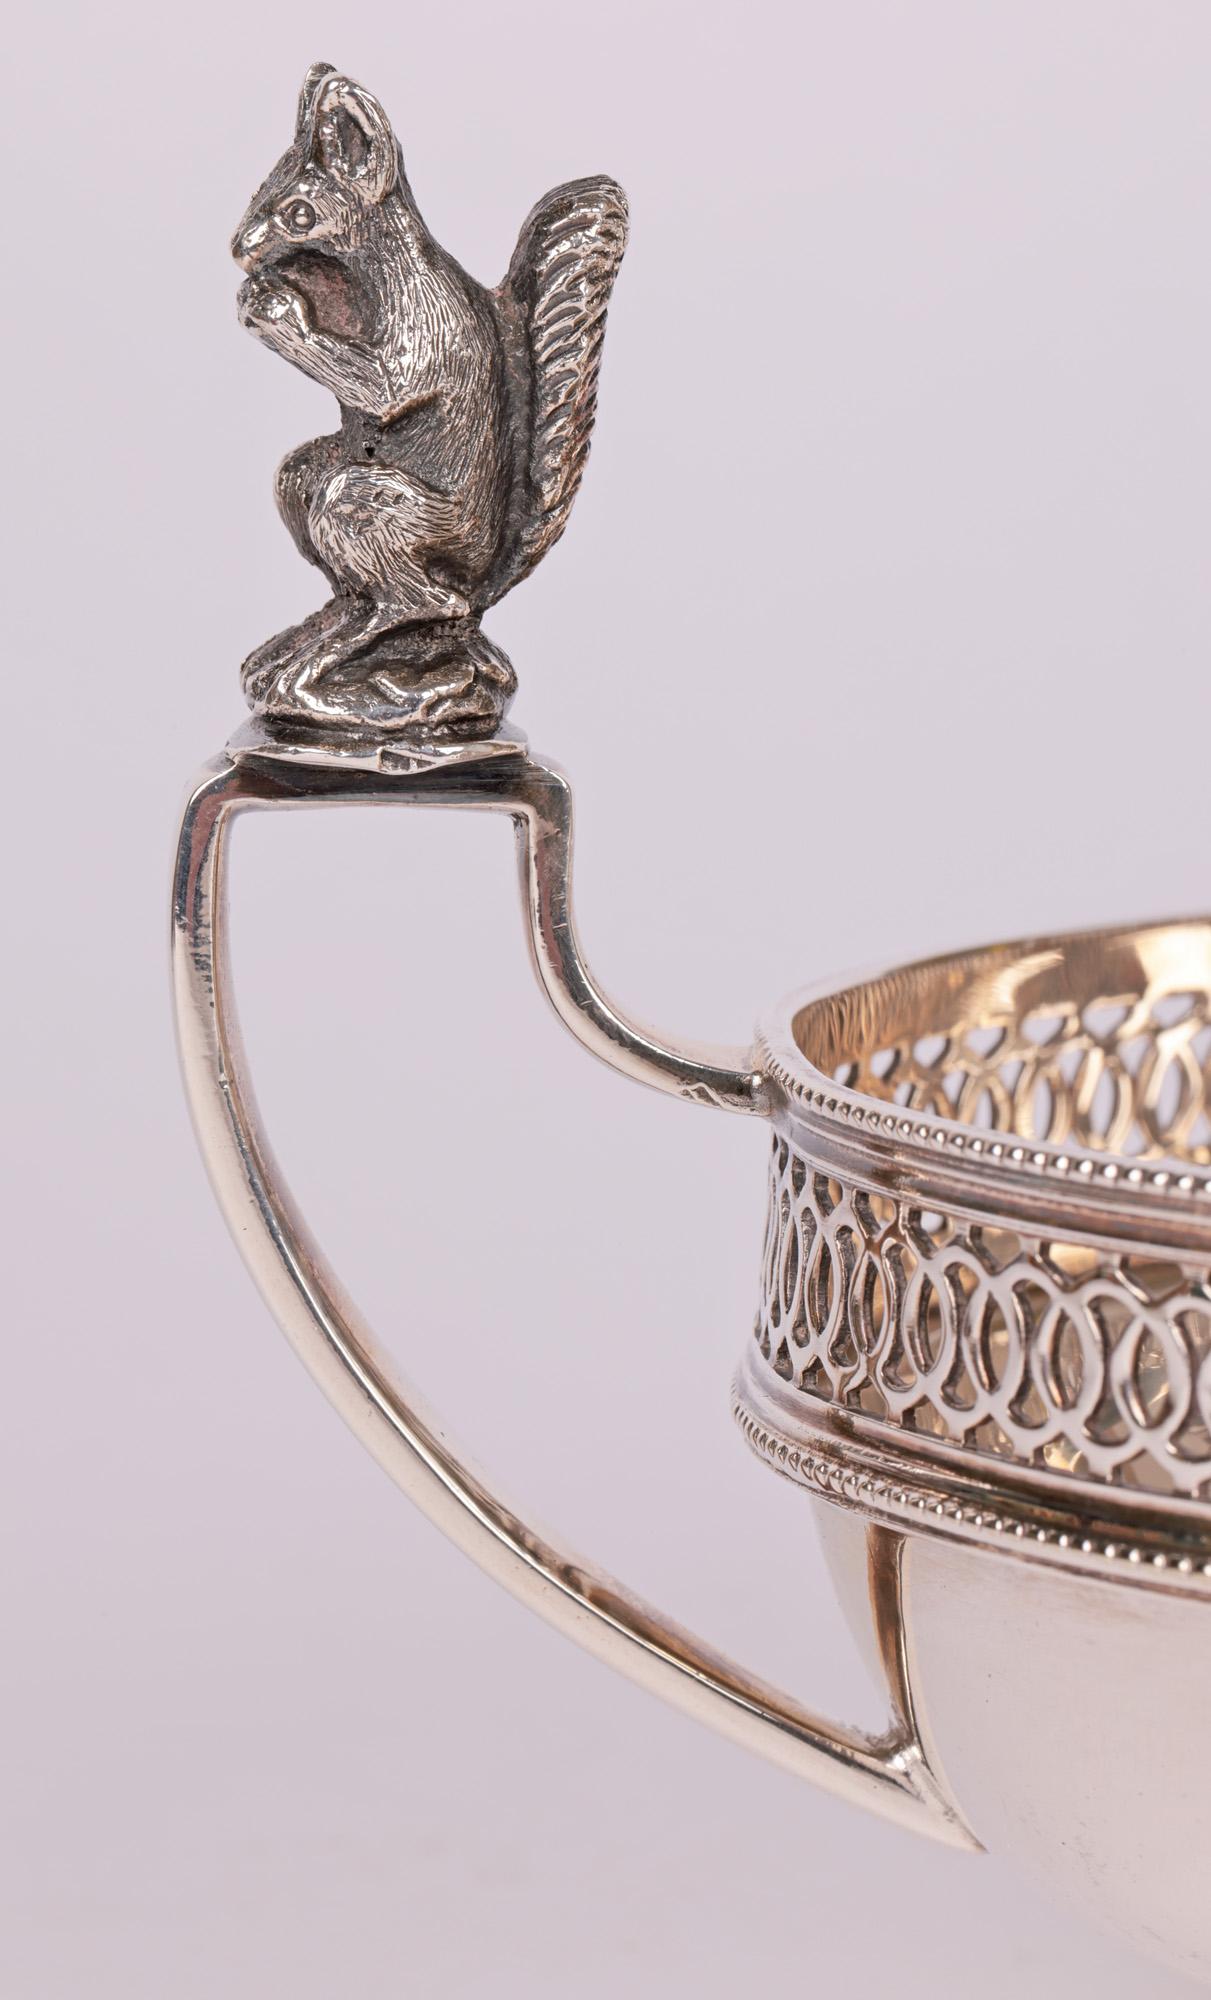 An unusual quality Edwardian English silver plate twin handle nut dish the handles mounted with squirrels by Charles S Green, Birmingham and made around 1905. The dish is of oval shaped standing raised on a narrow oval pedestal base with a circle